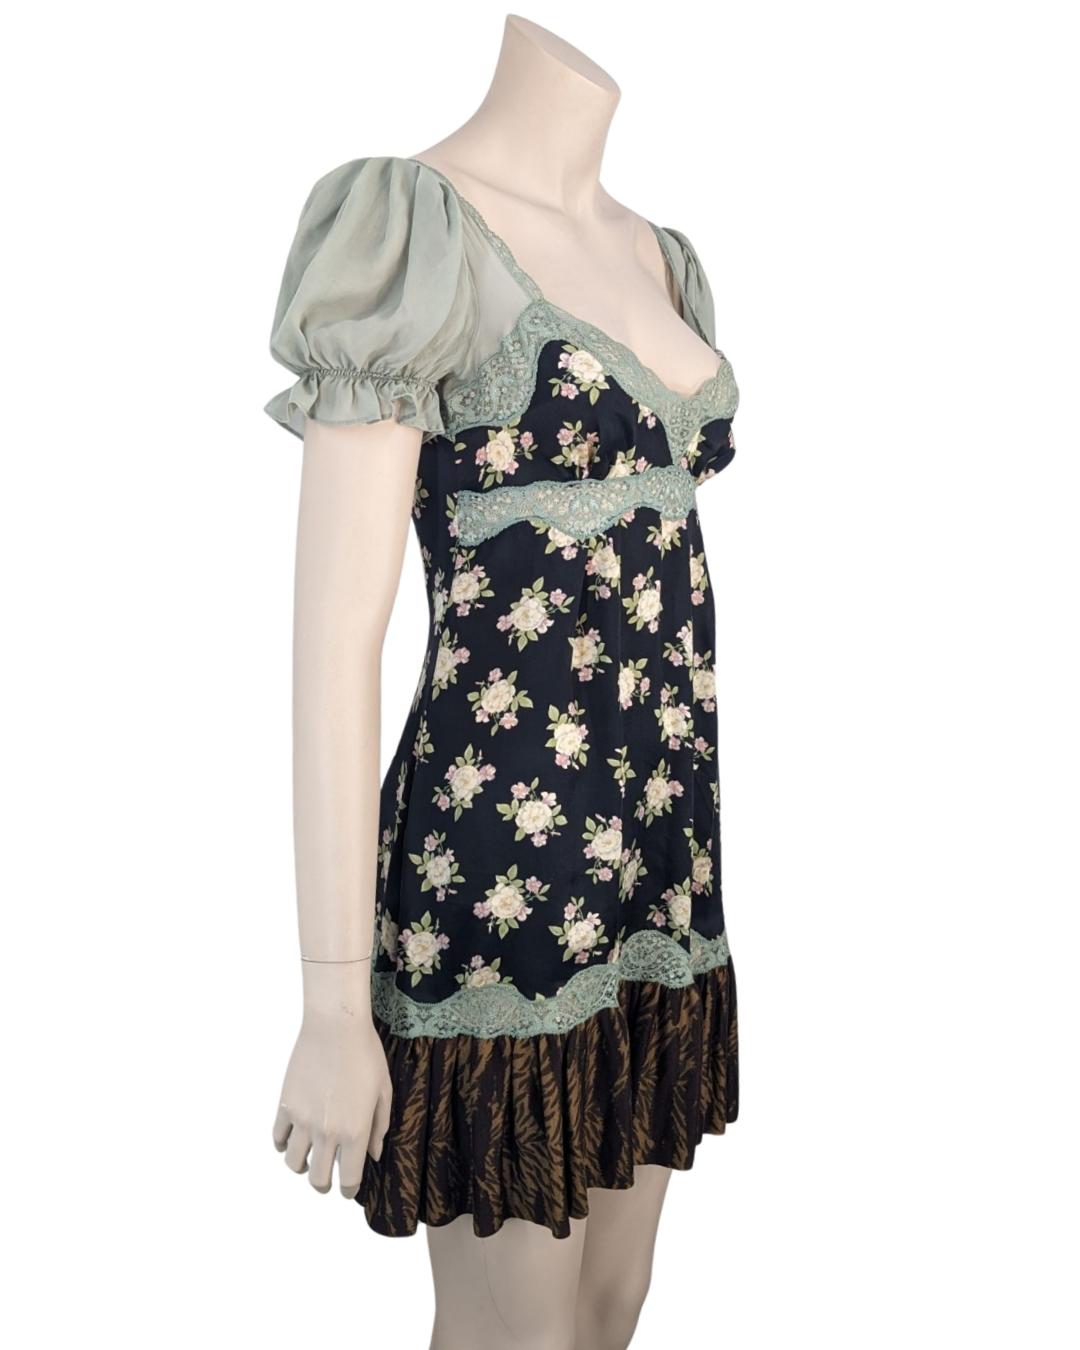 Rare mini dress from the Fall / Winter 2005 collection . Also seen on the campaign.

. Almond lace details
. Pleated fabric on the bottom of the dress
. Zip on the back
. Floral pattern

Size Fits S / M

Flat measurements : 

Breast : 37 cm
Waist :